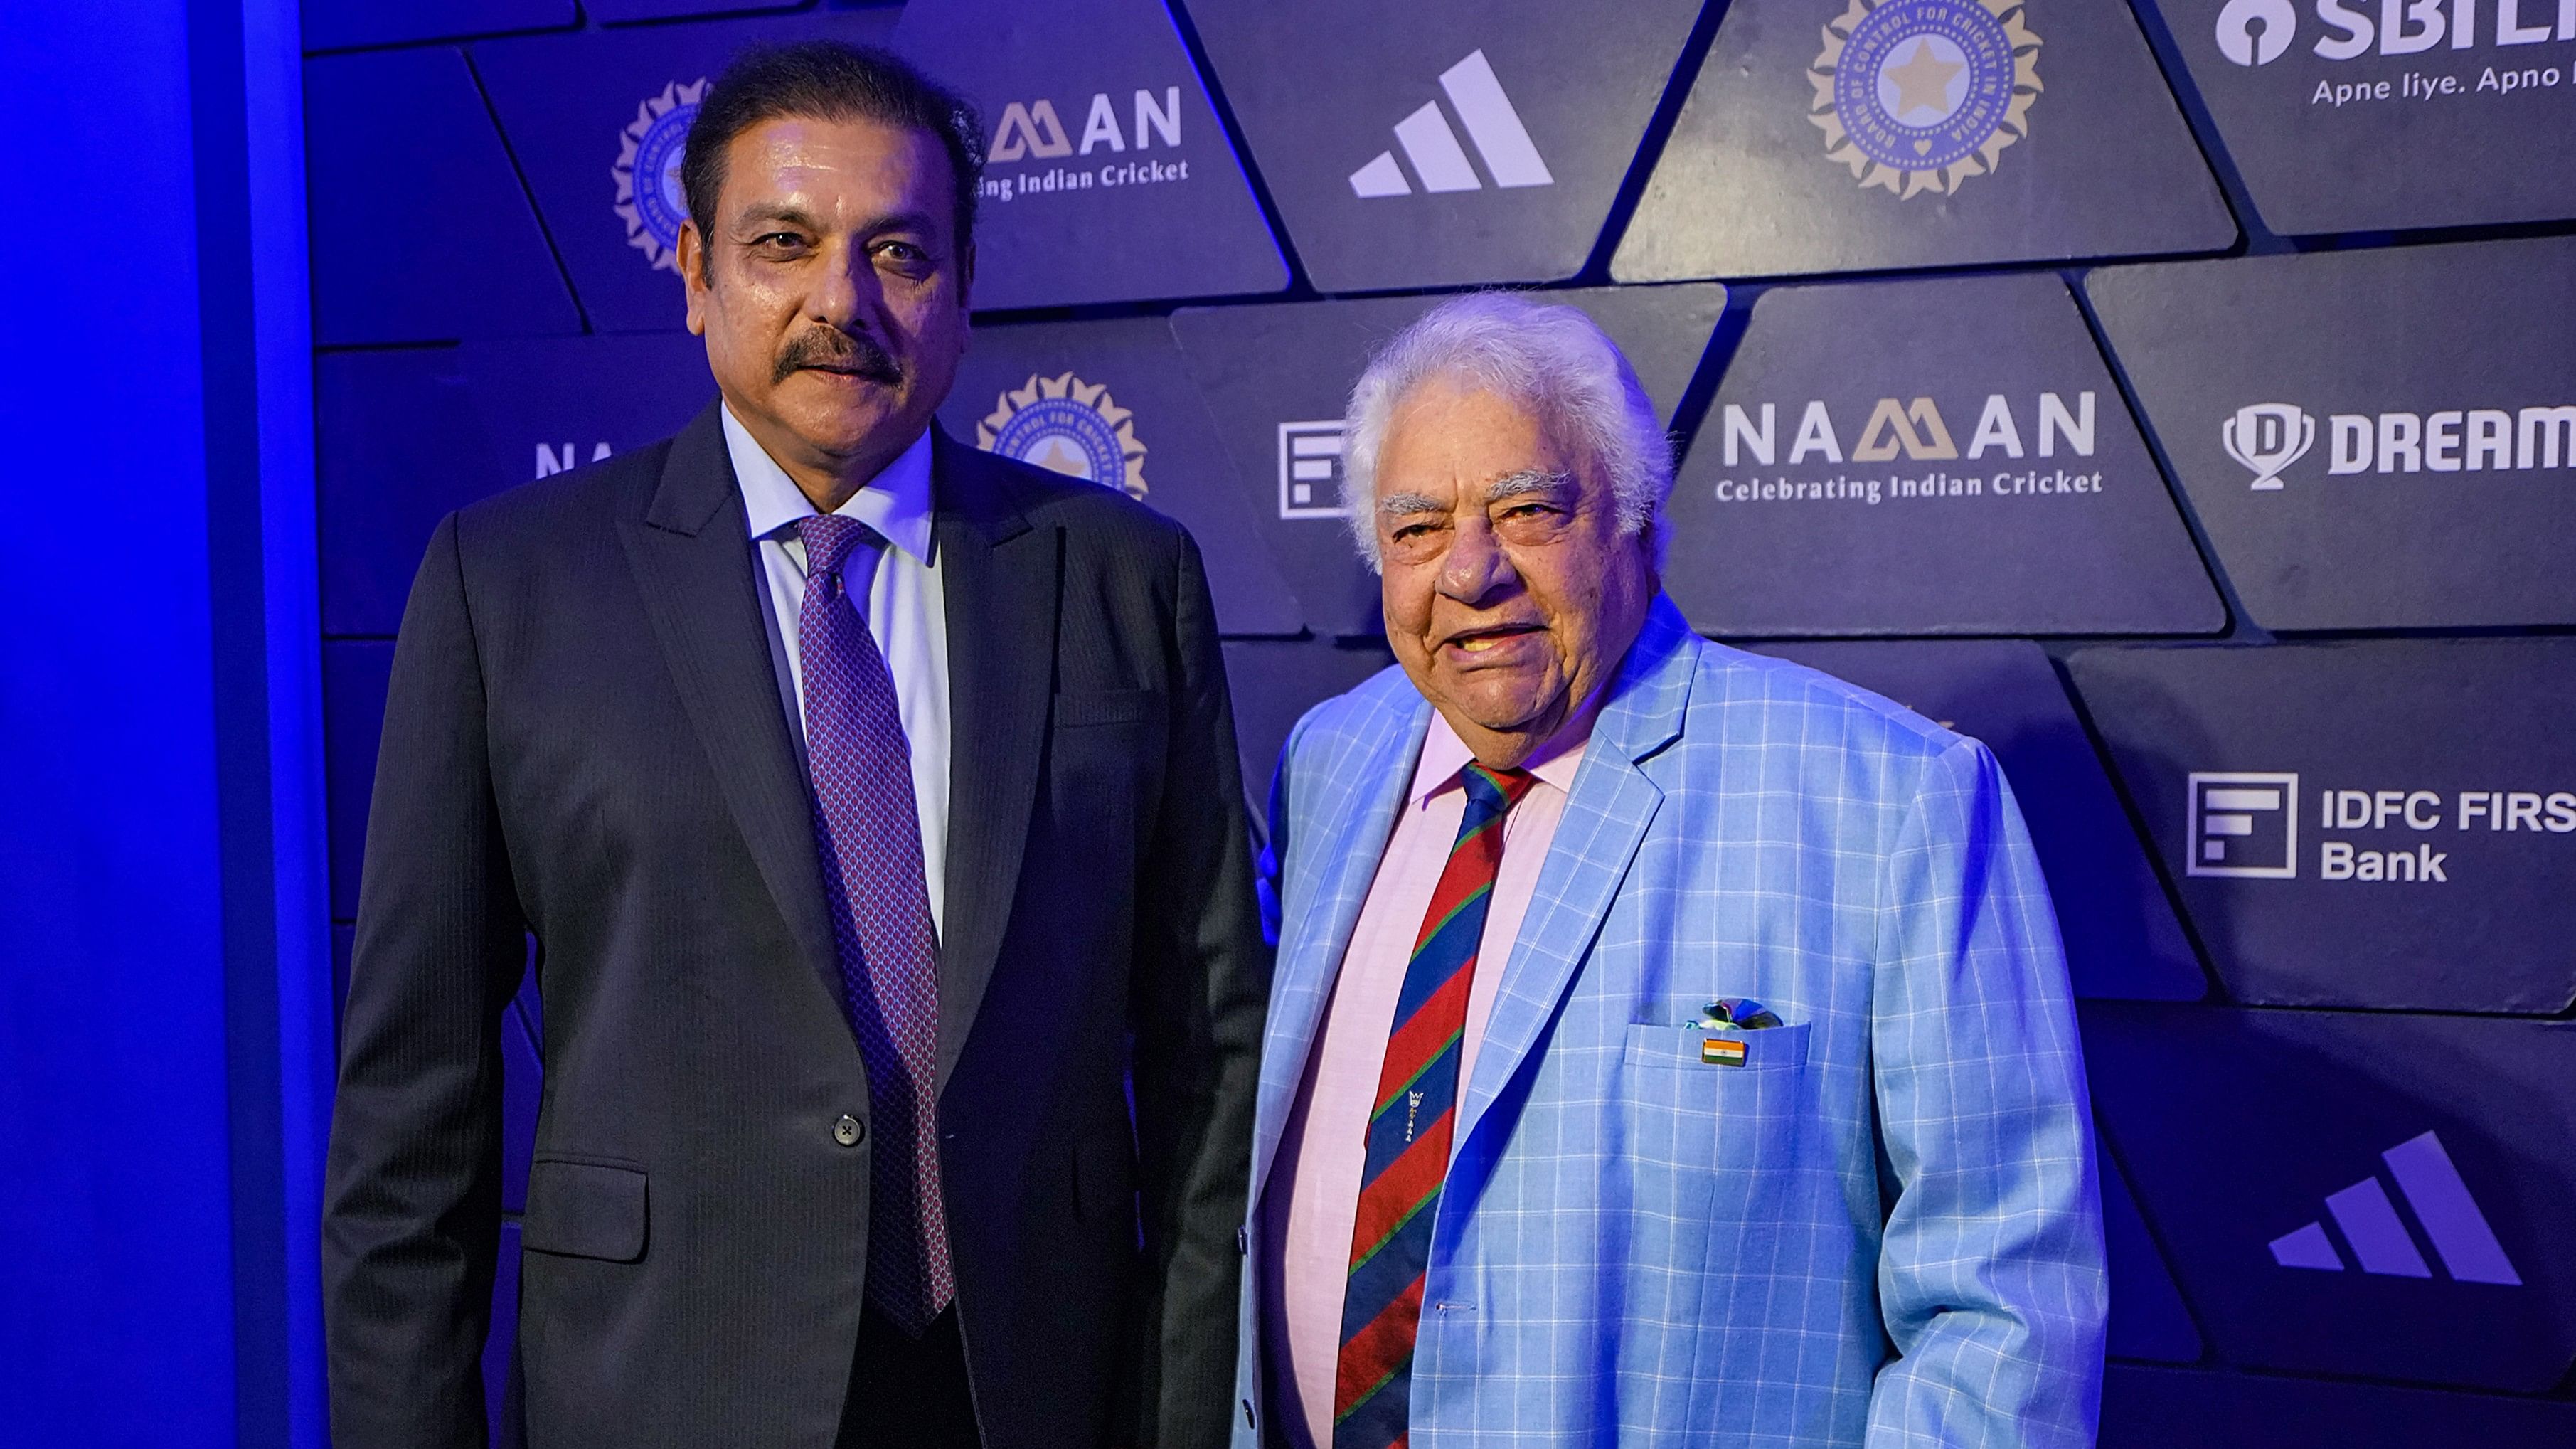 <div class="paragraphs"><p>Ravi Shastri (left) and Farokh Engineer strike a happy pose at the BCCI Annual Awards night in Hyderabad.</p></div>